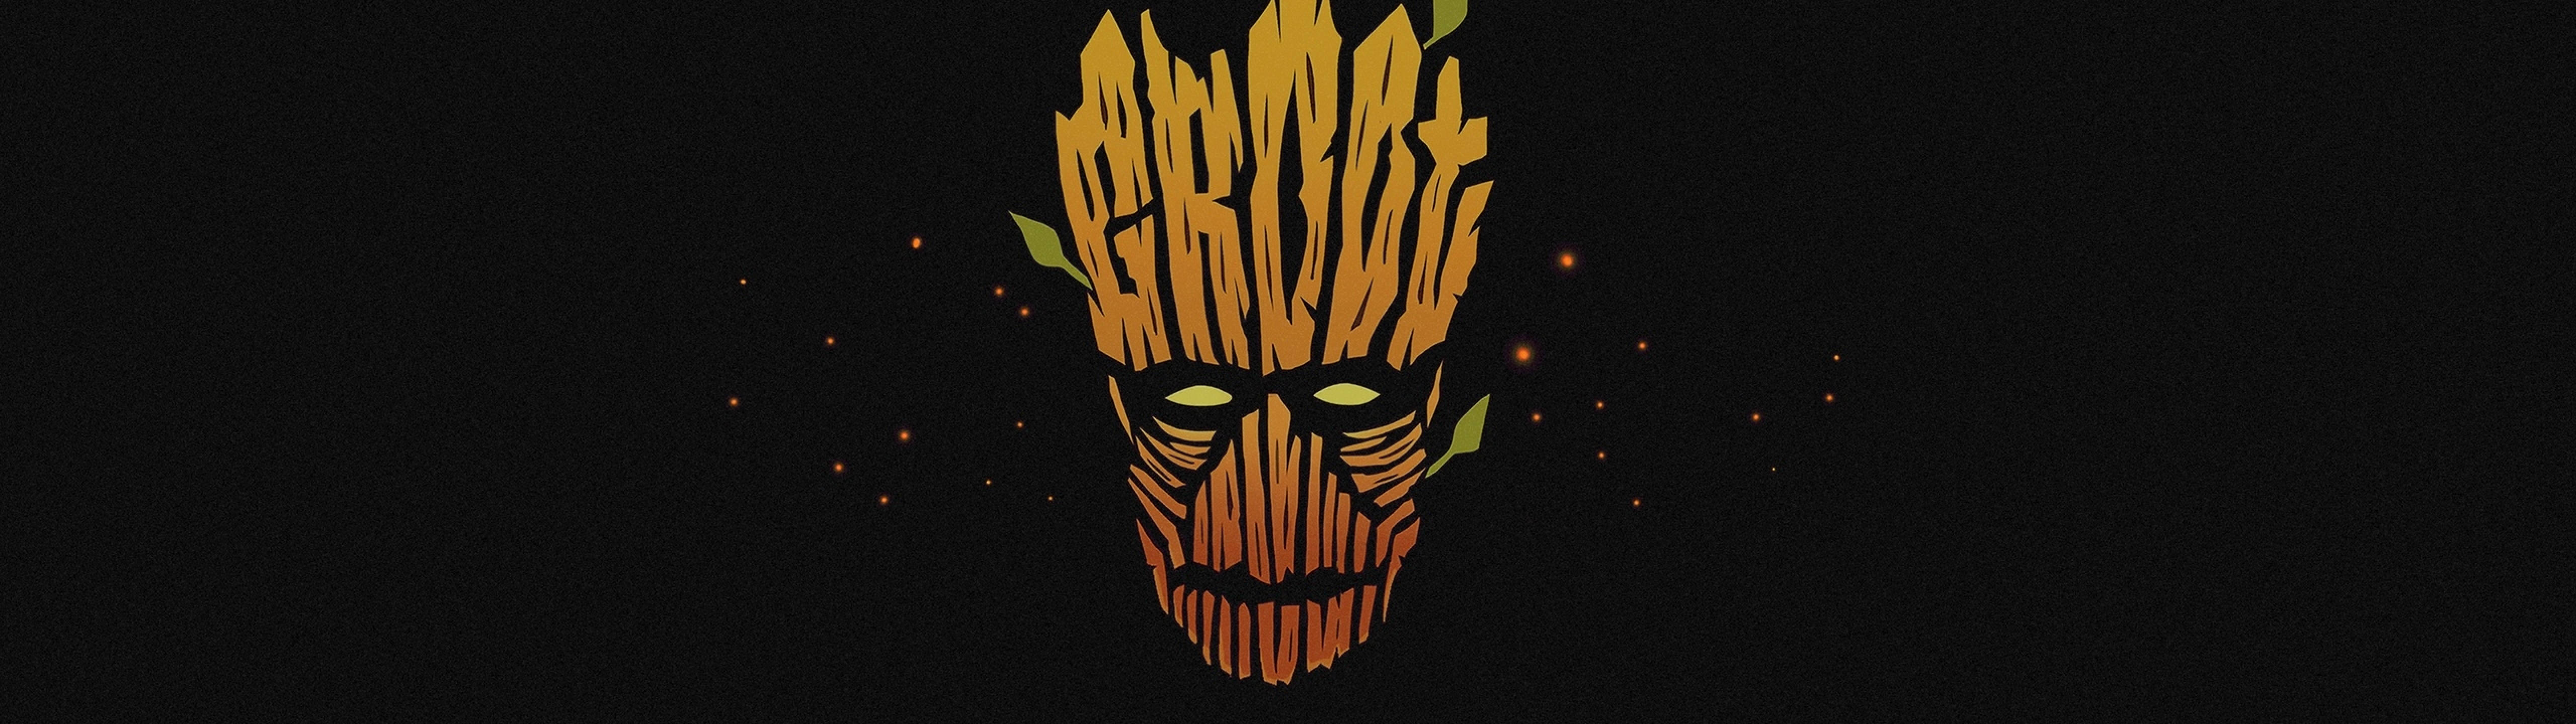 Groot Guardian Of The Galaxy Marvel 5120 X 1440 Background